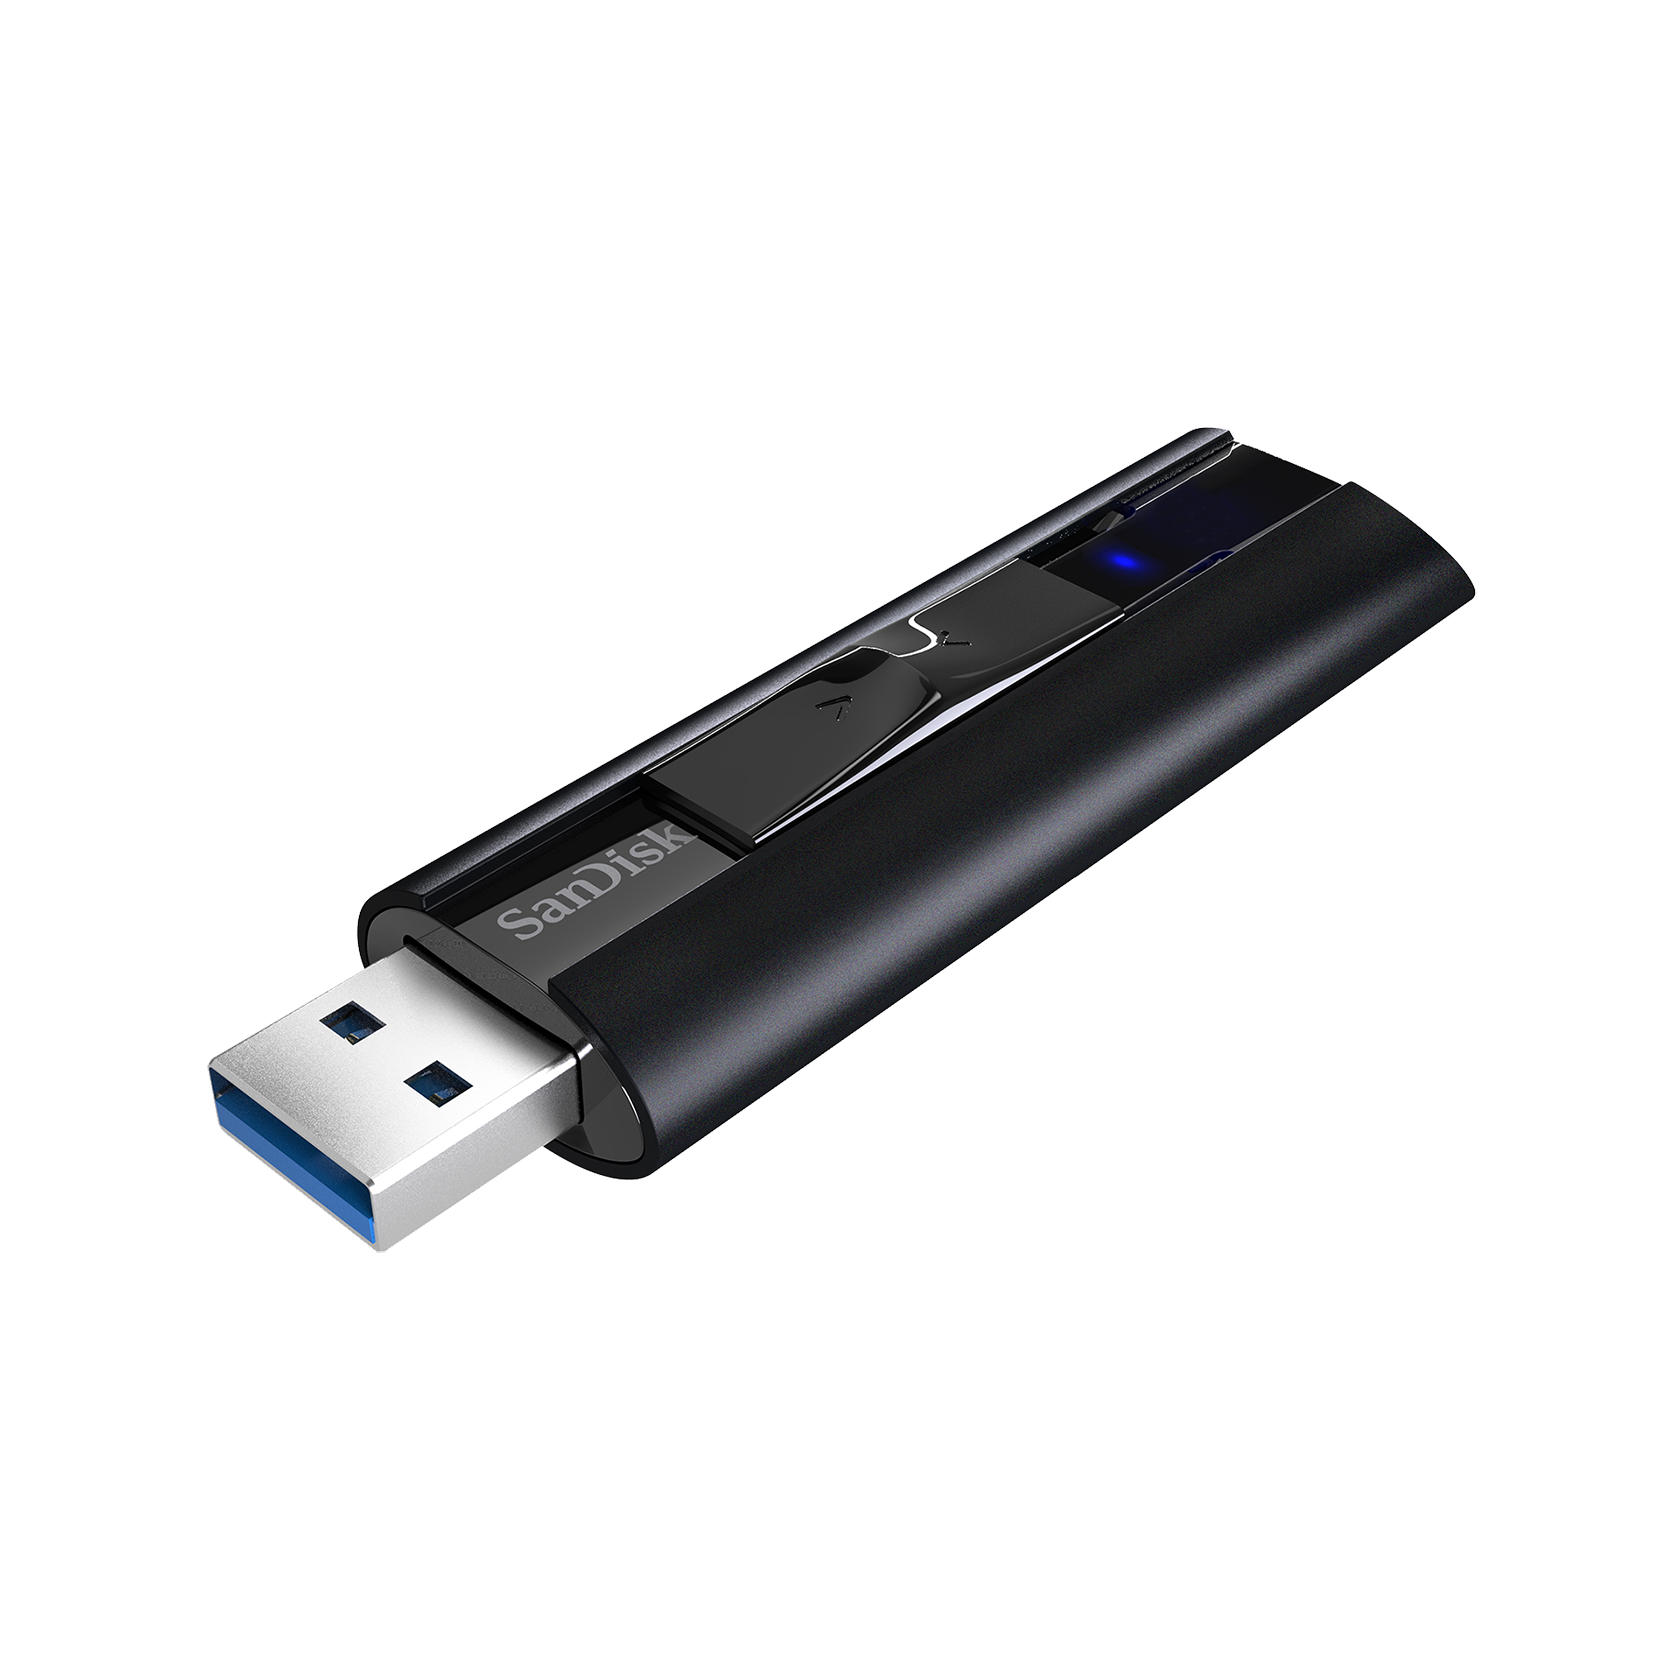 SanDisk 1TB Extreme PRO USB 3.2 Solid State Flash Drive - SDCZ880-1T00-G46 - image 1 of 4